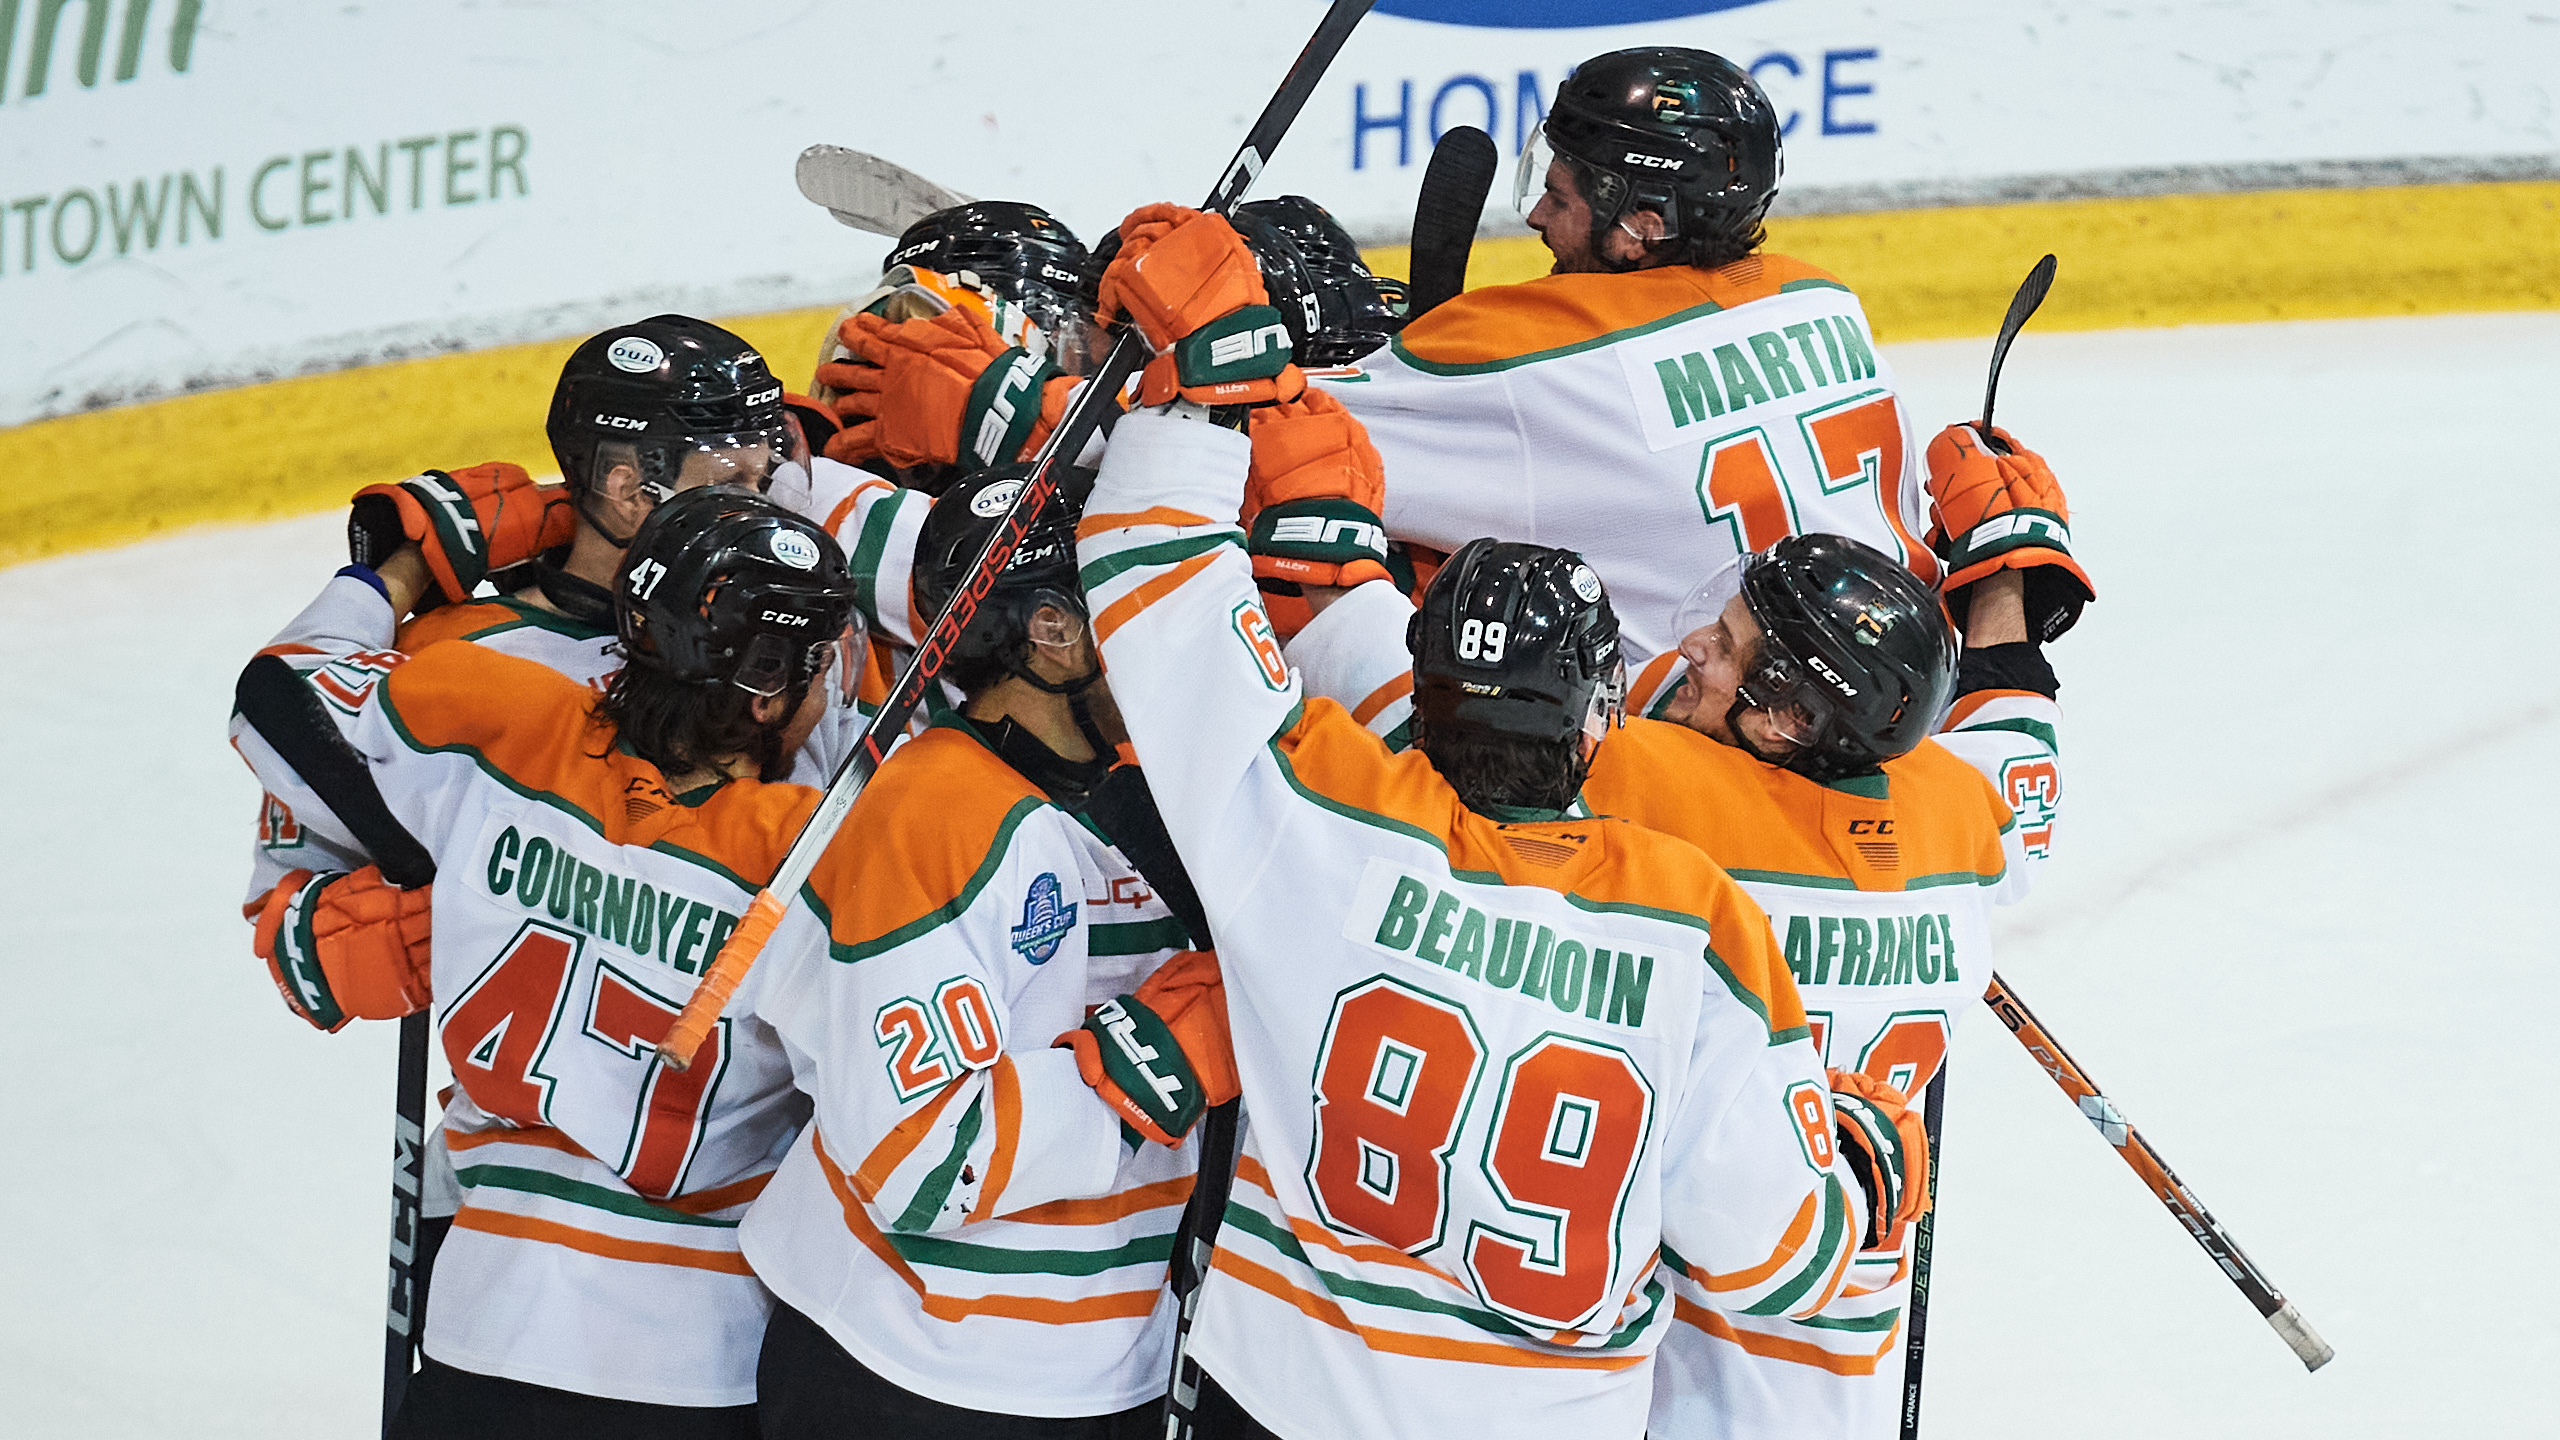 UQTR celebrate in a huddle on the ice